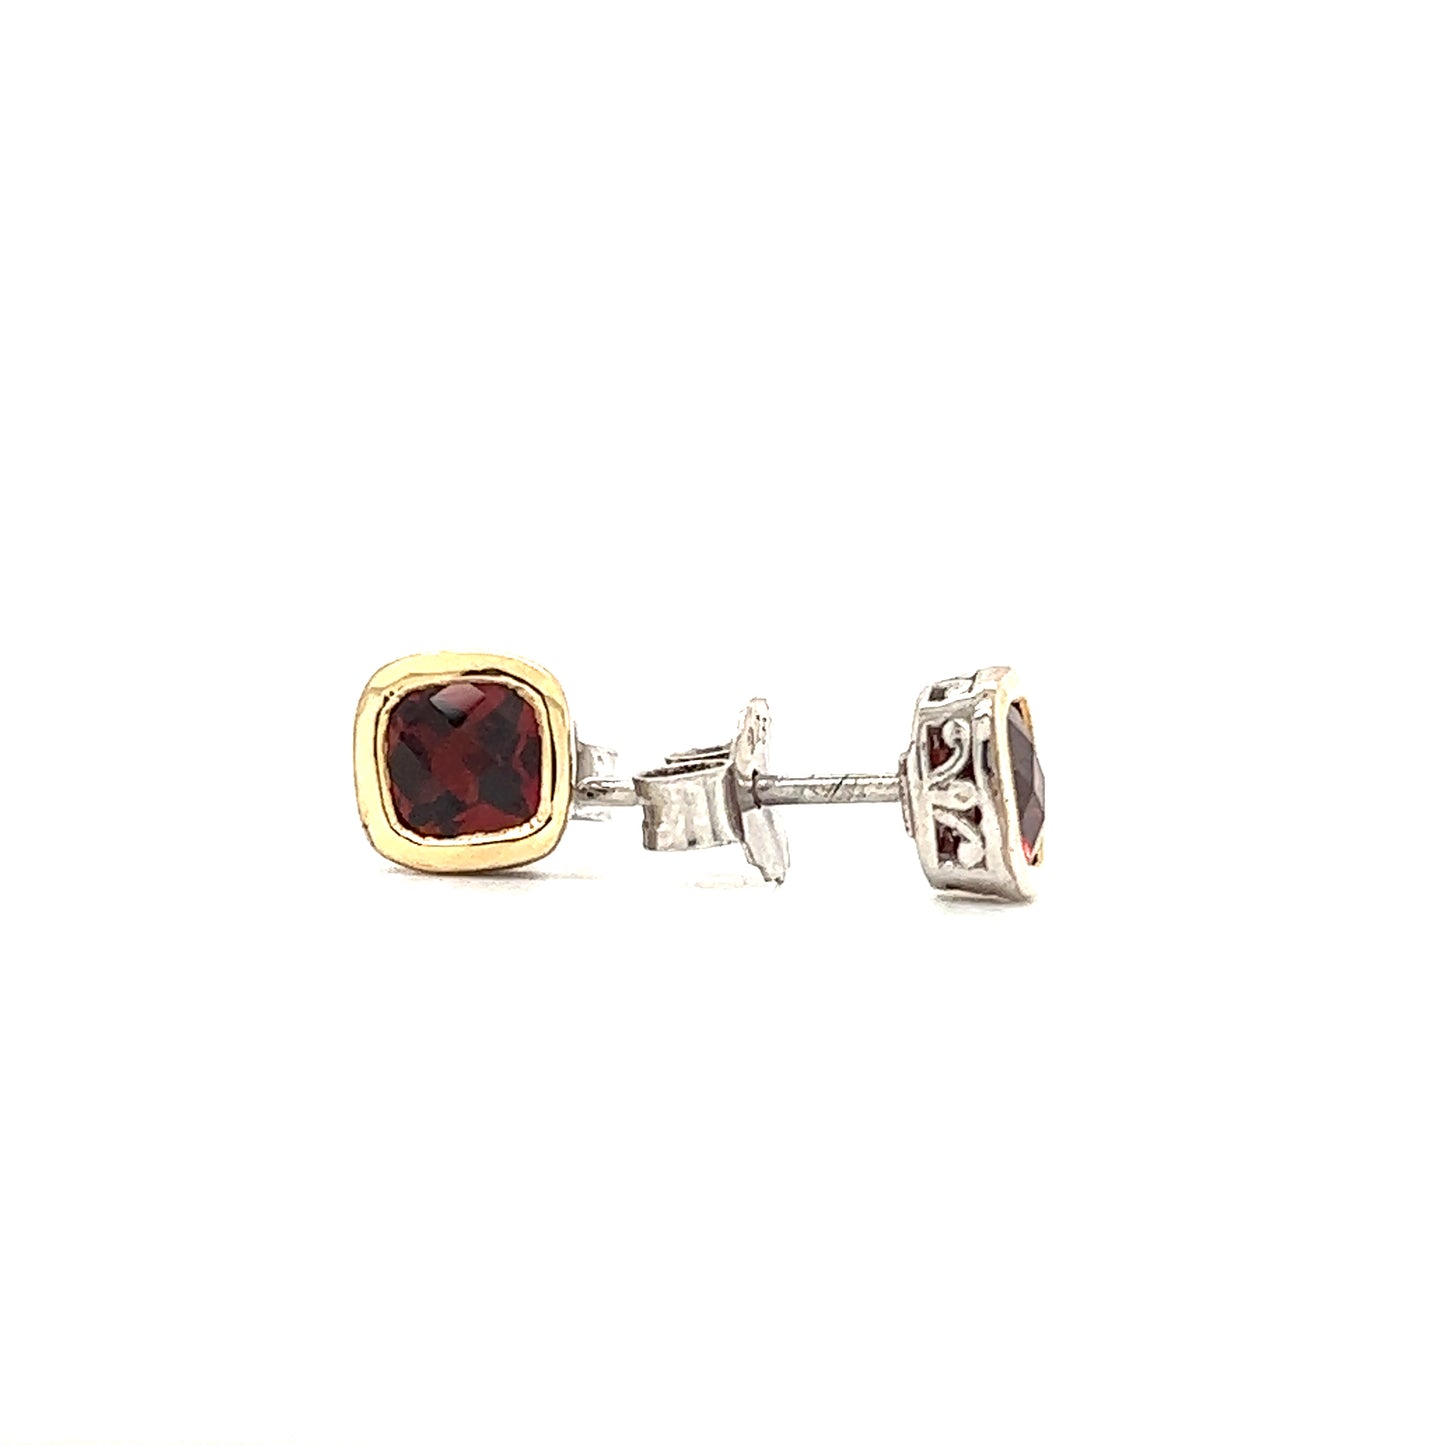 Cushion Garnet Stud Earrings in Sterling Silver Front and Side View